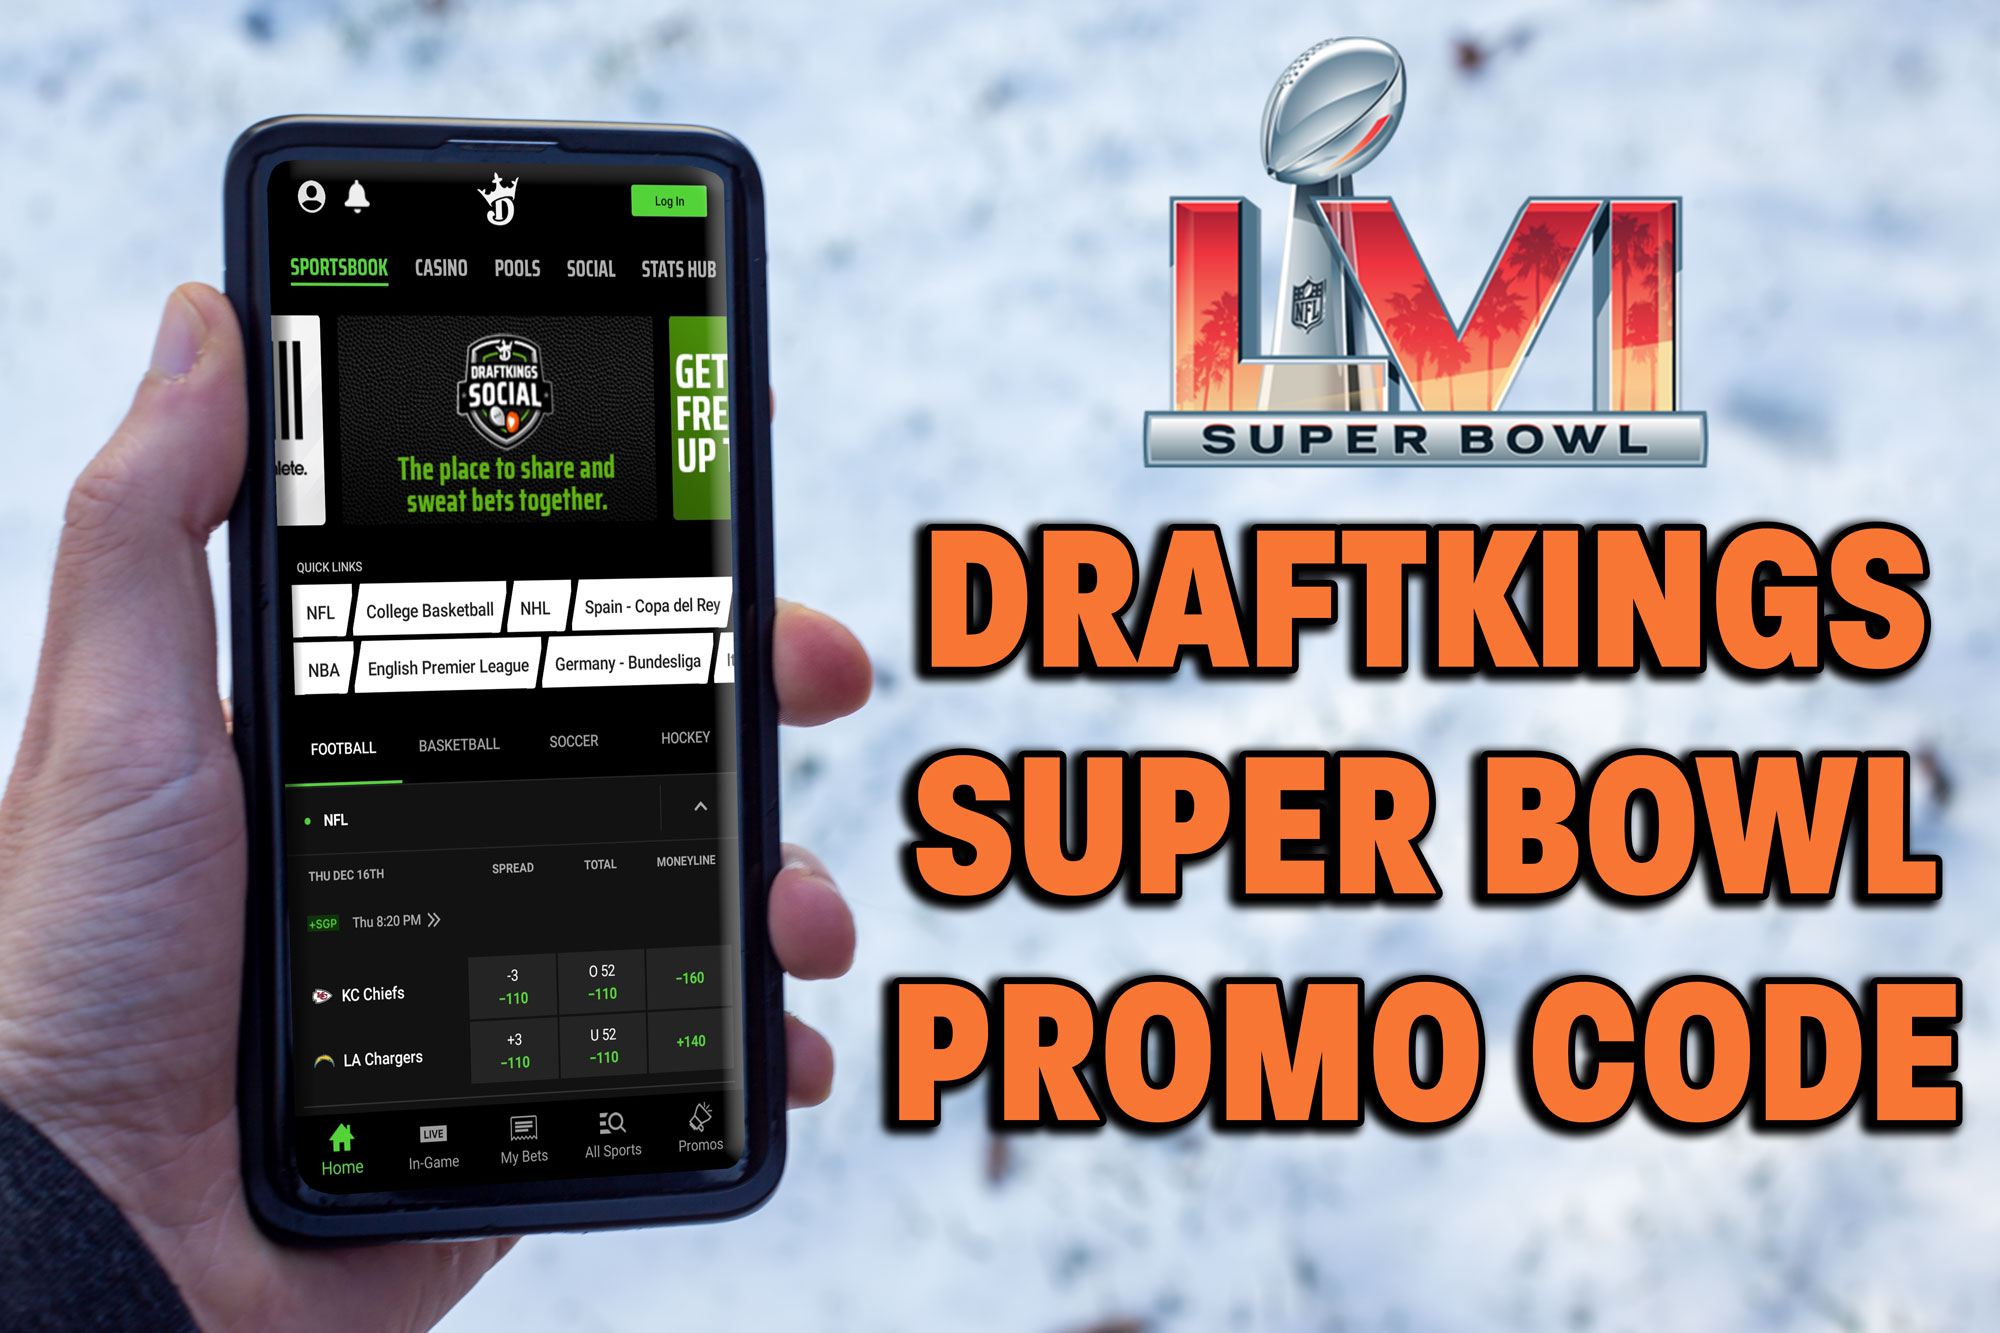 Super Bowl teams 2022: Which teams are playing in Super Bowl 56? -  DraftKings Network